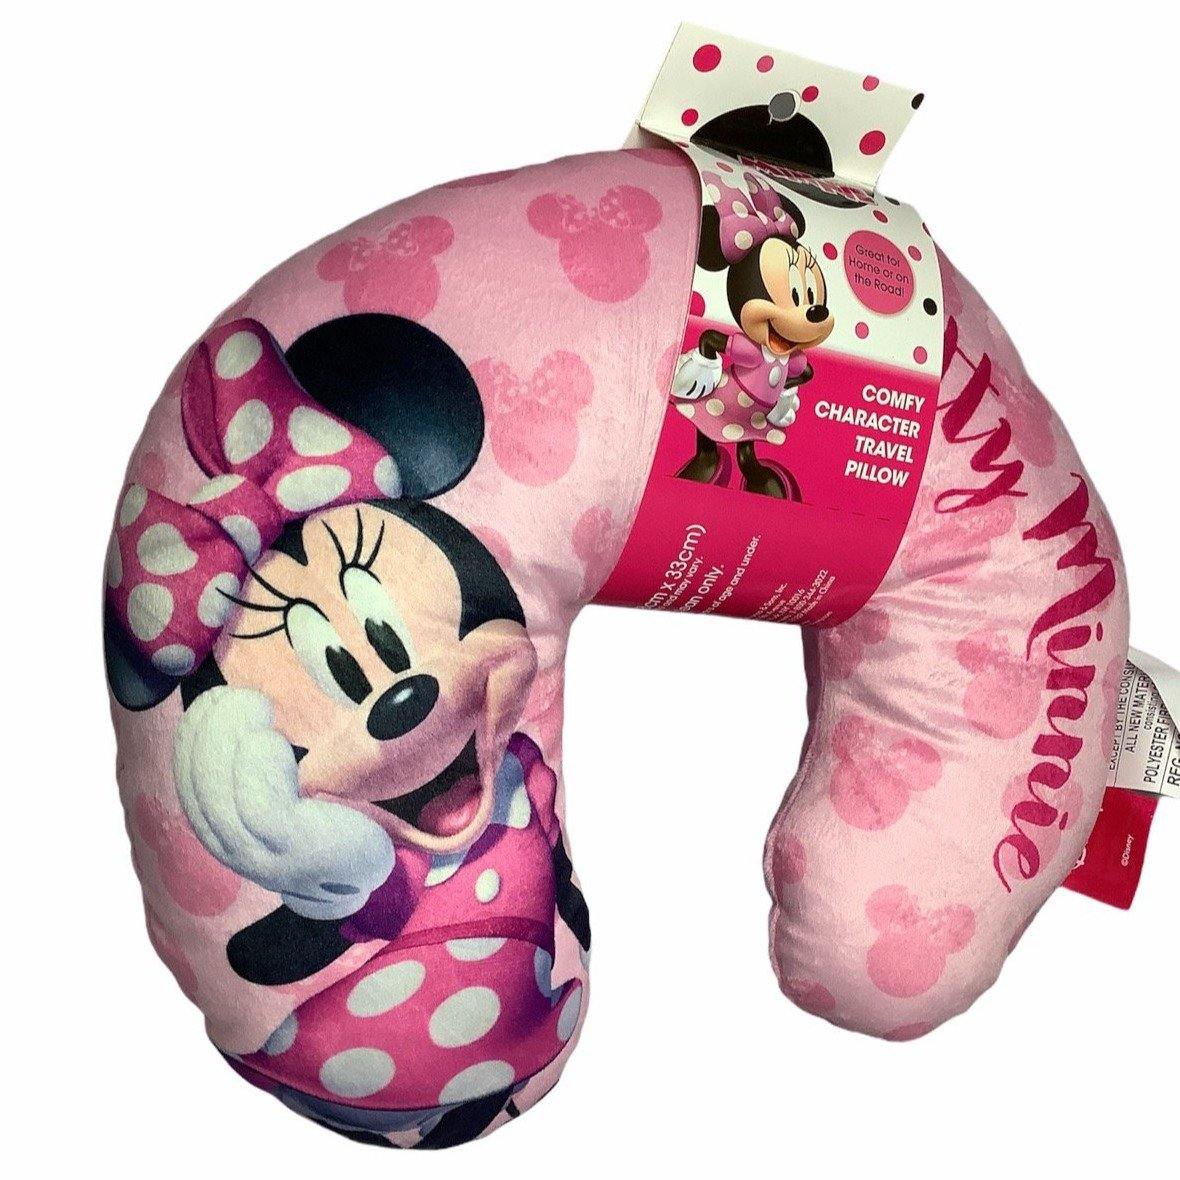 Disney Minnie Mouse Pink Hearts Travel Pillow